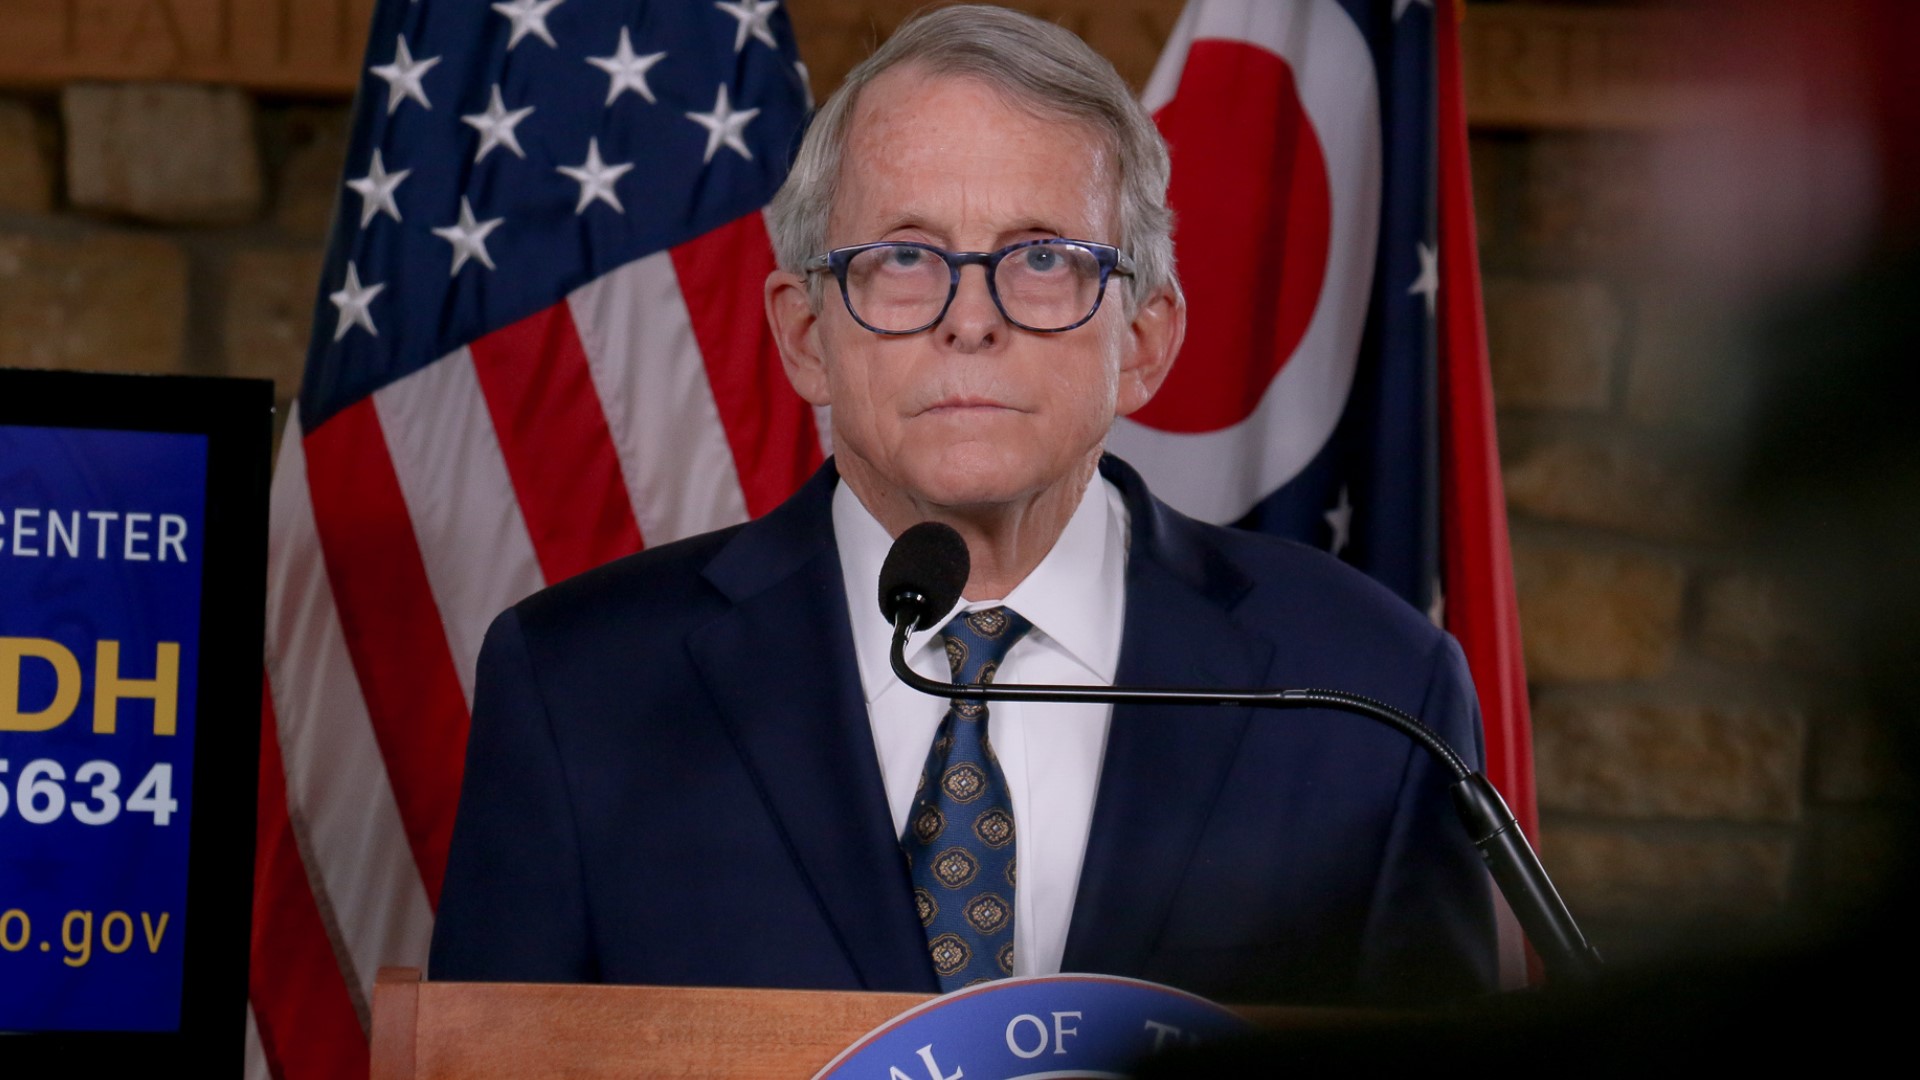 Some Ohio lawmakers believe Gov. DeWine's decision to lift the health orders on June 2 was a move to get ahead of legislature that was going to rescind them anyways.